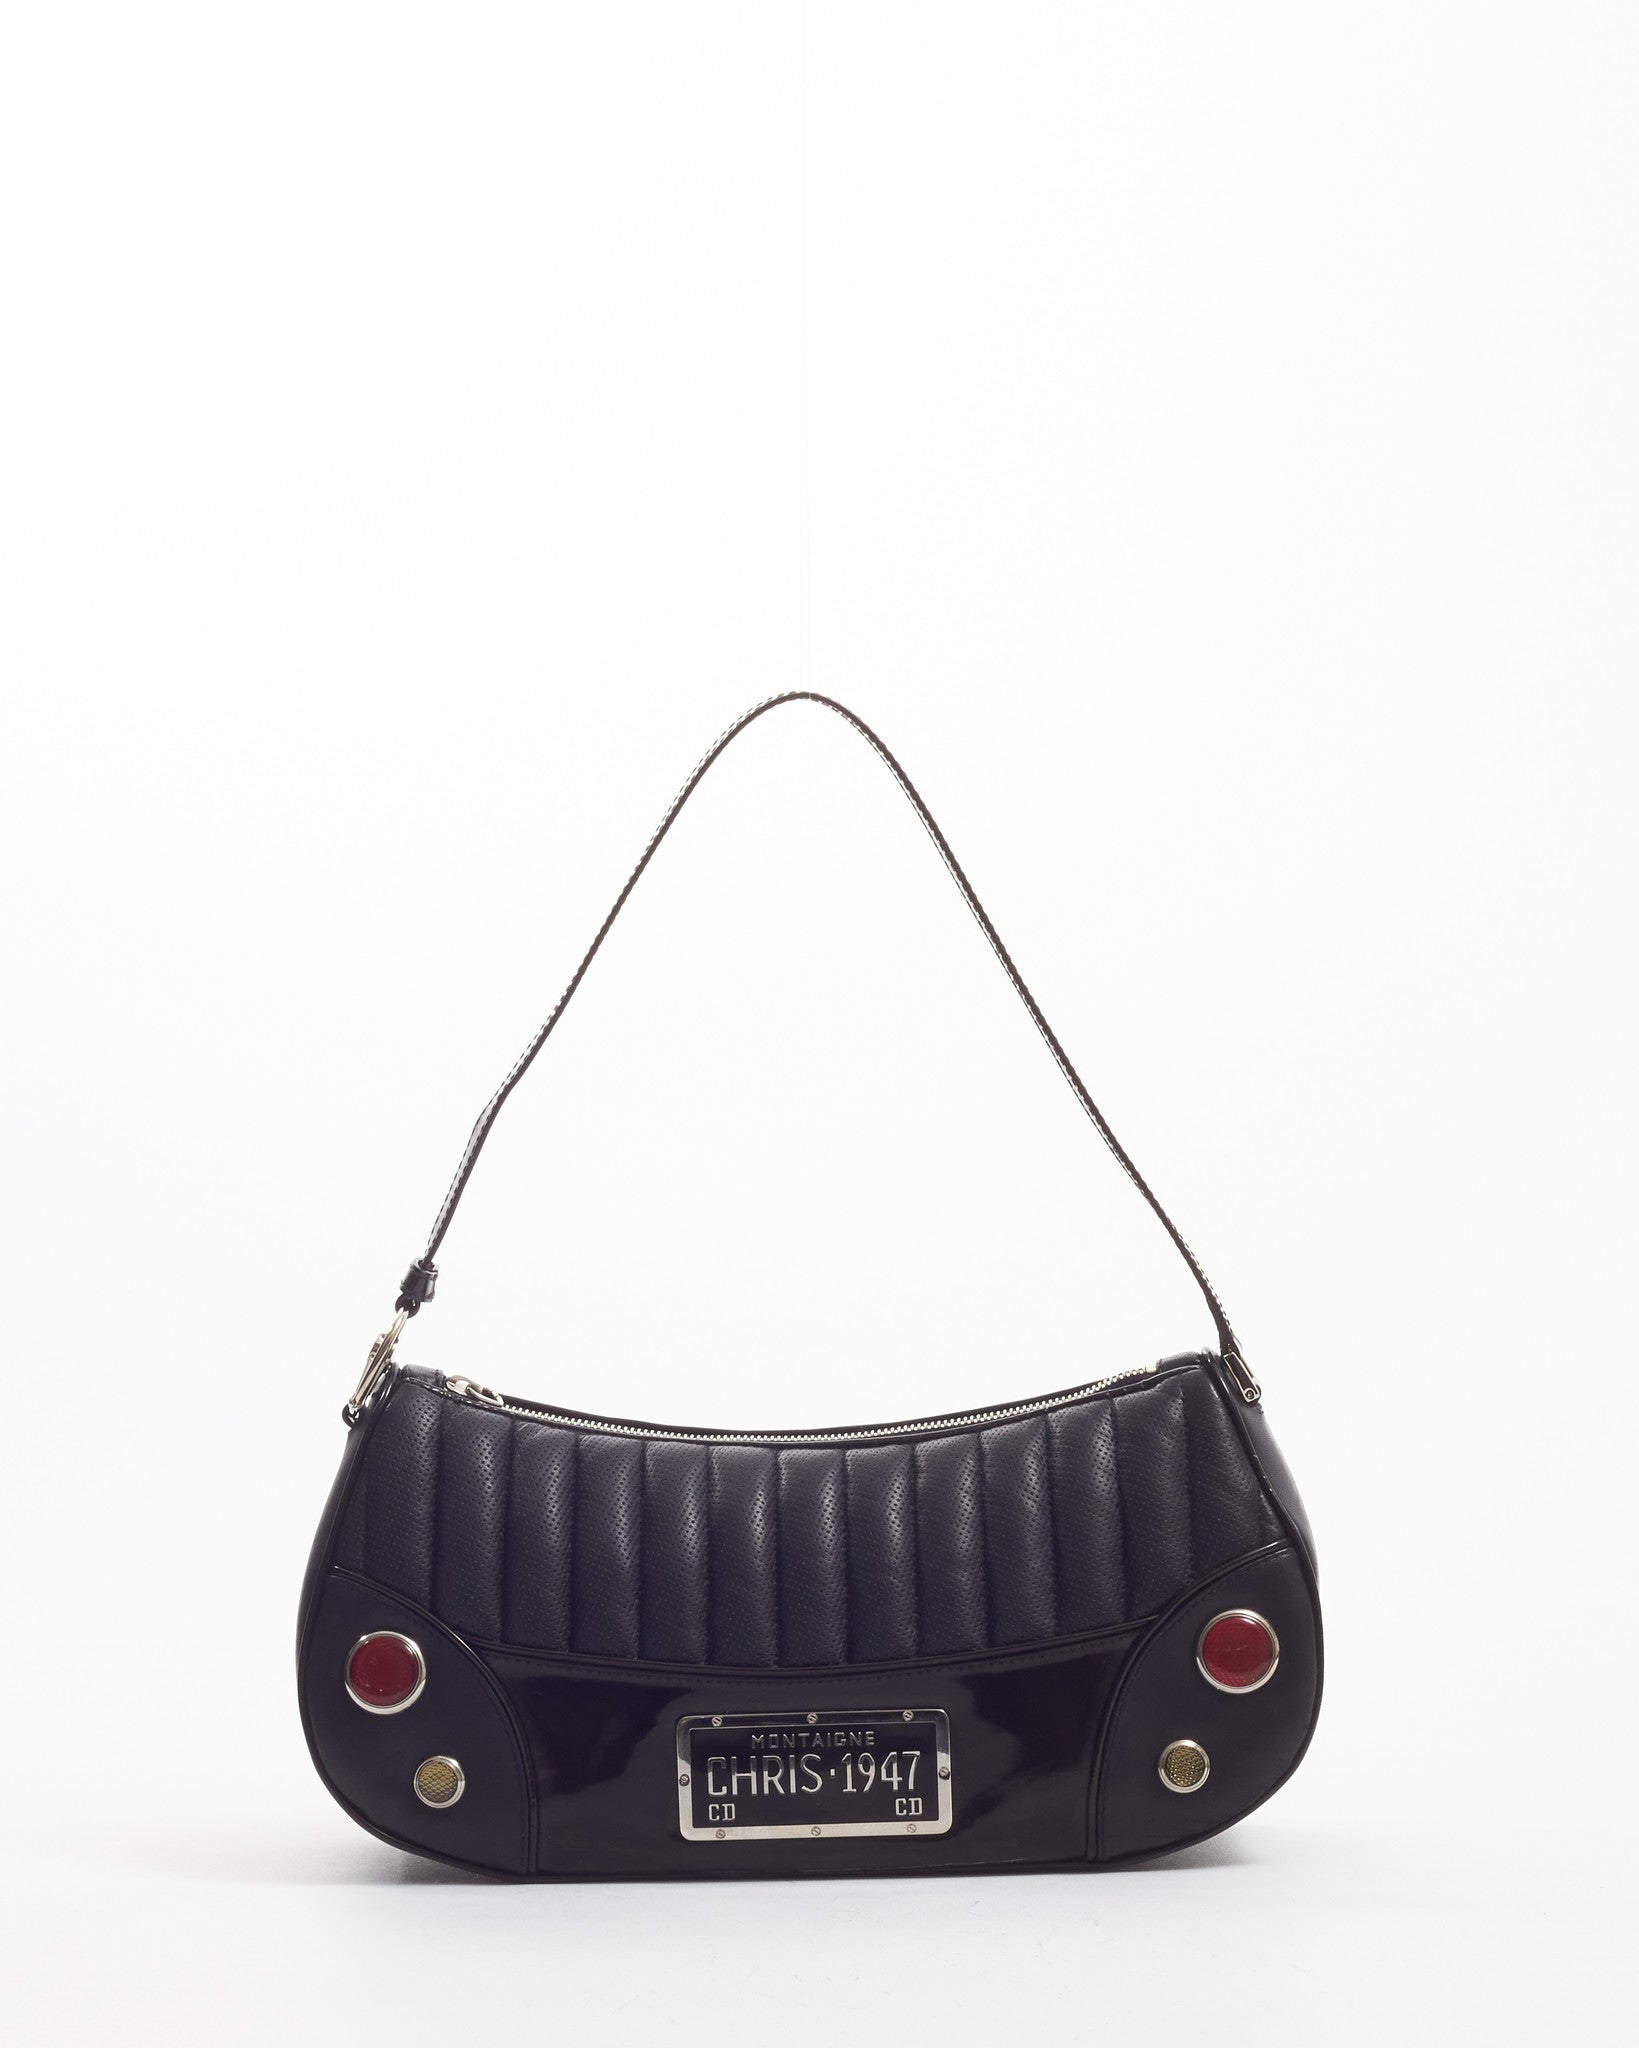 Dior Black Perforated Leather 1947 Montaigne Shoulder Bag